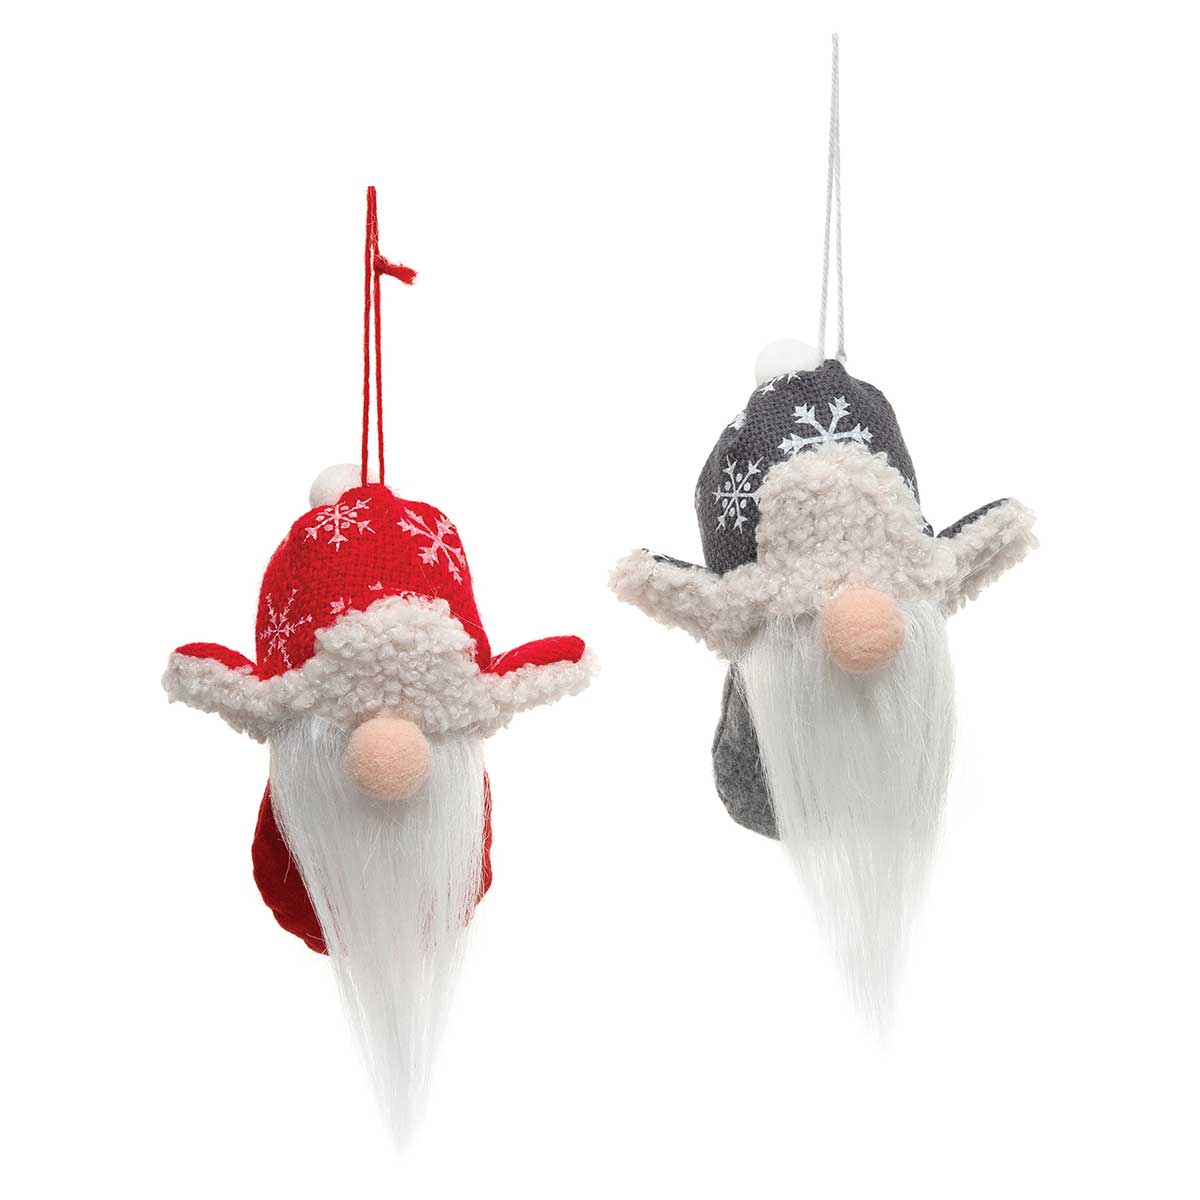 ORN FLAP HAT GNOME 2 ASSORTED 3IN X 2IN X 4.5IN RED/GREY